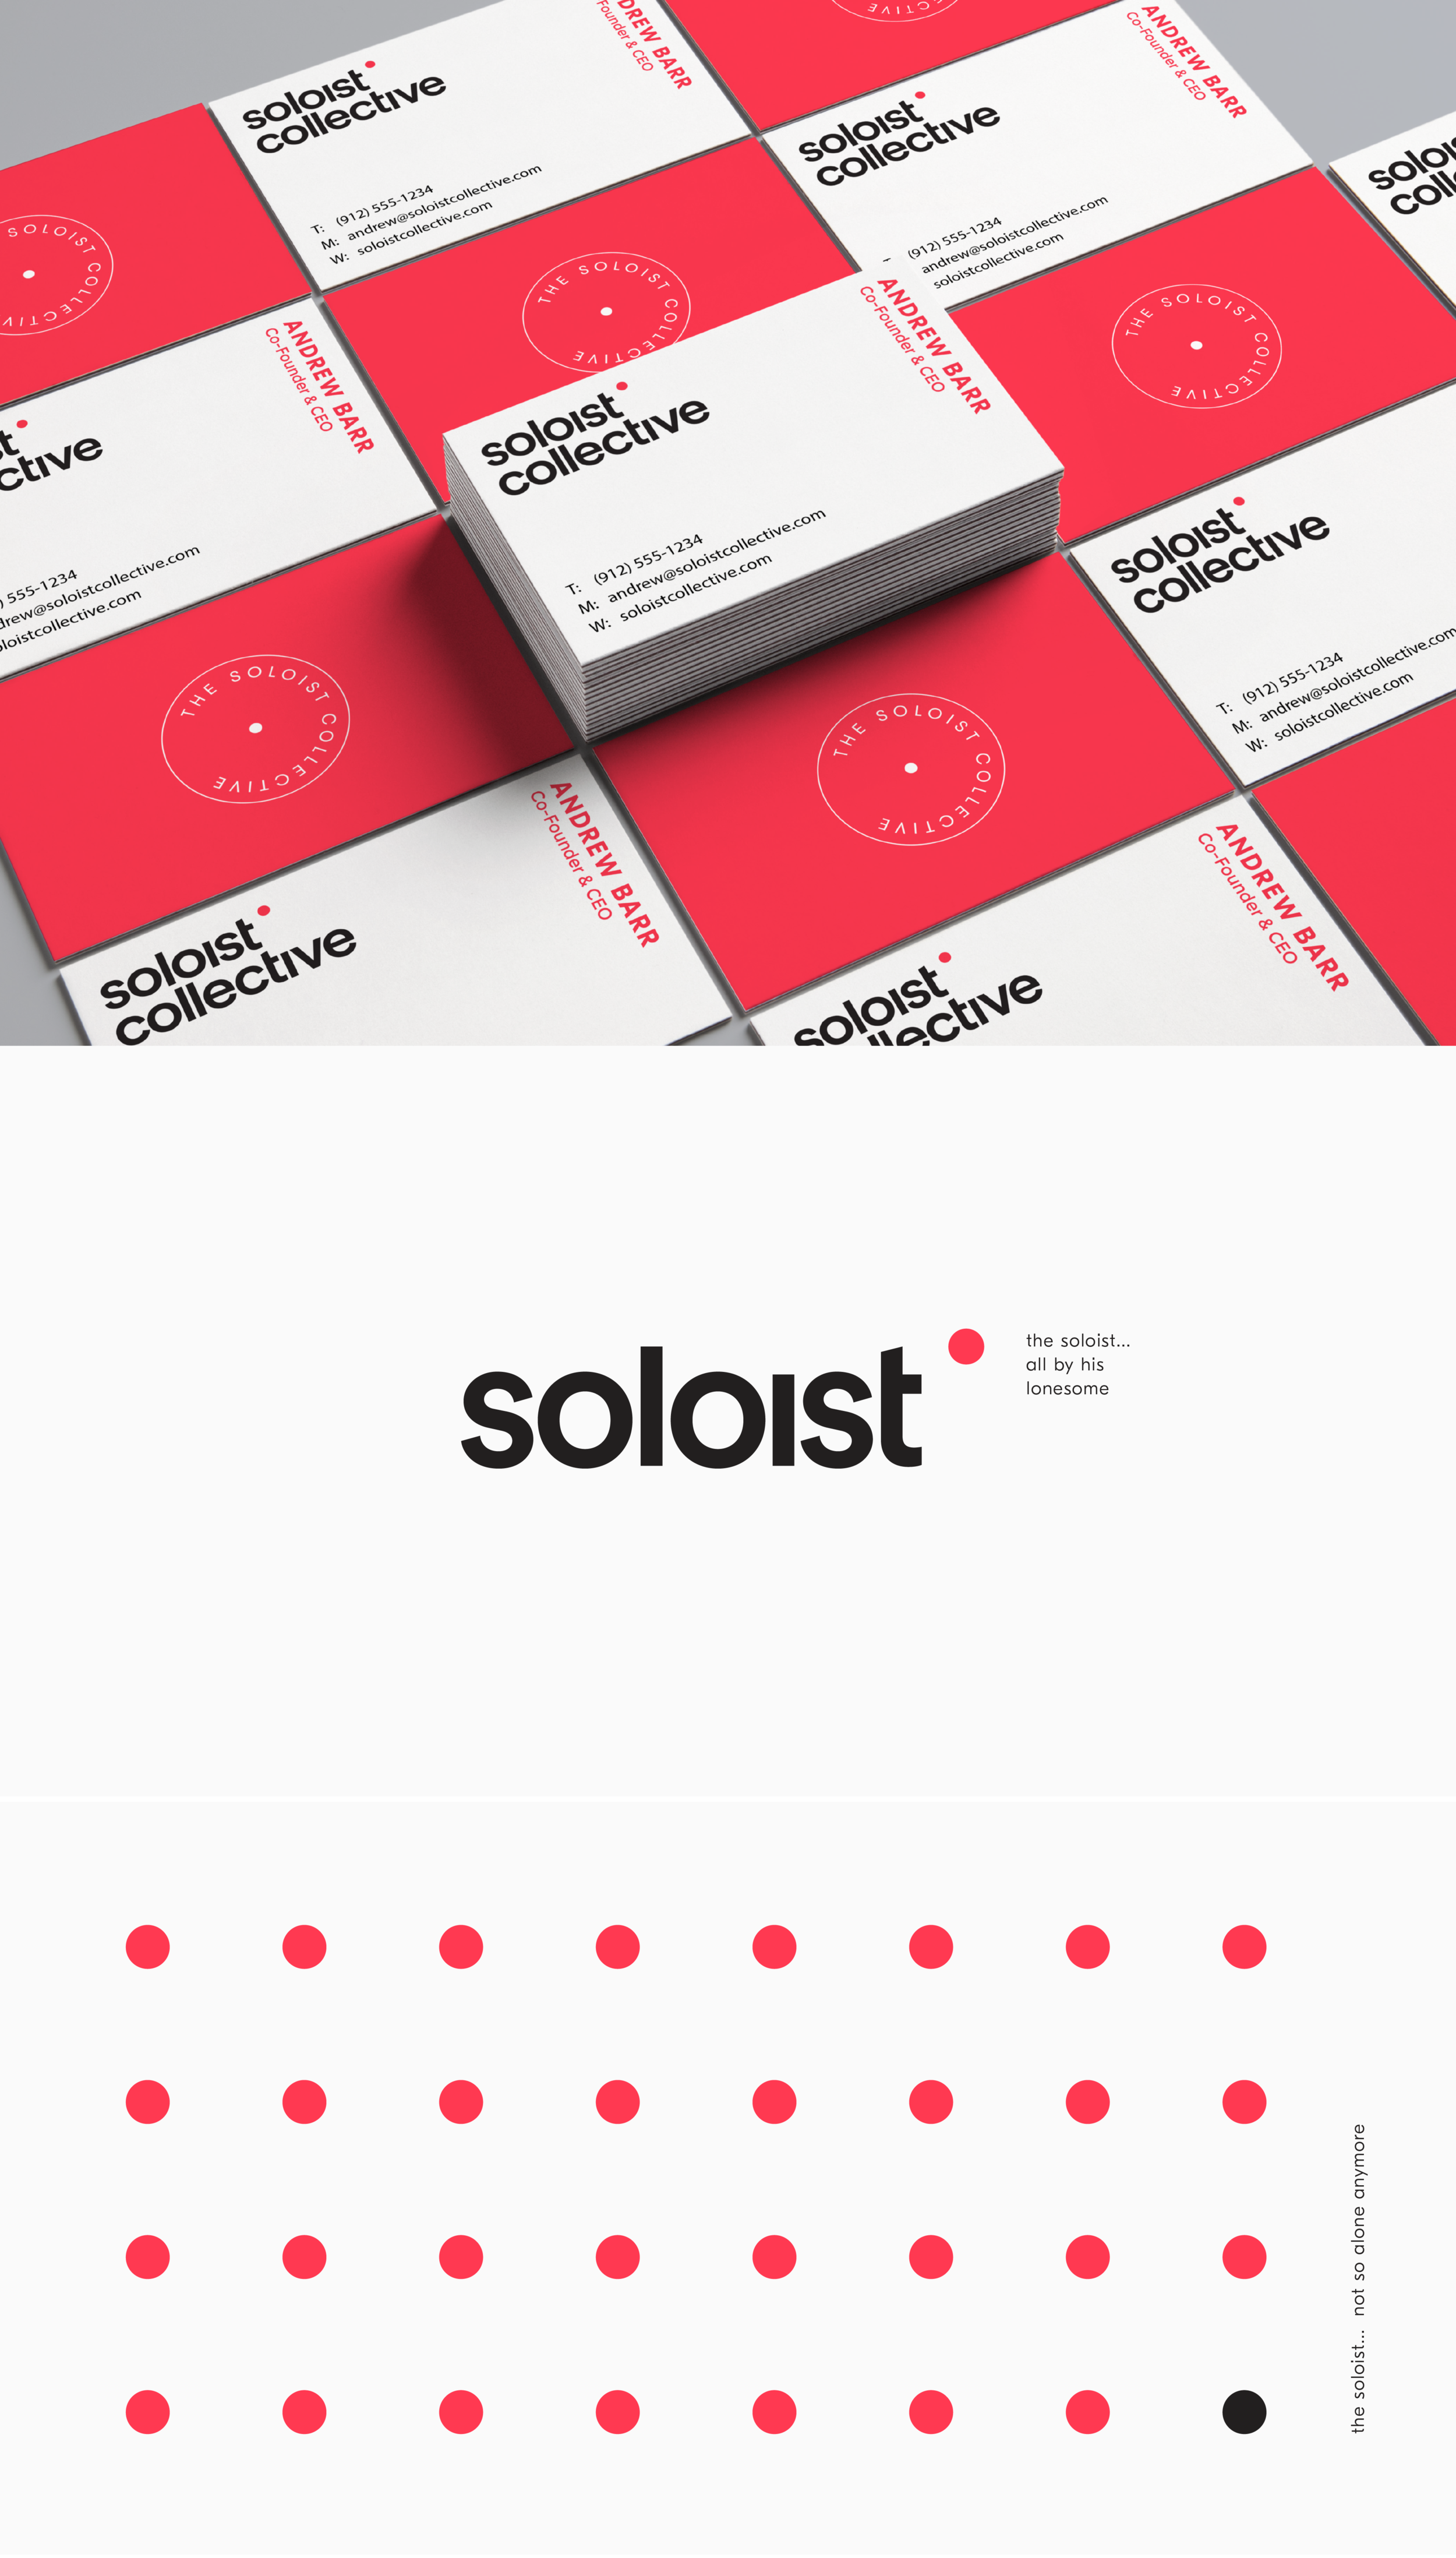 soloist collective design 2@2x.png